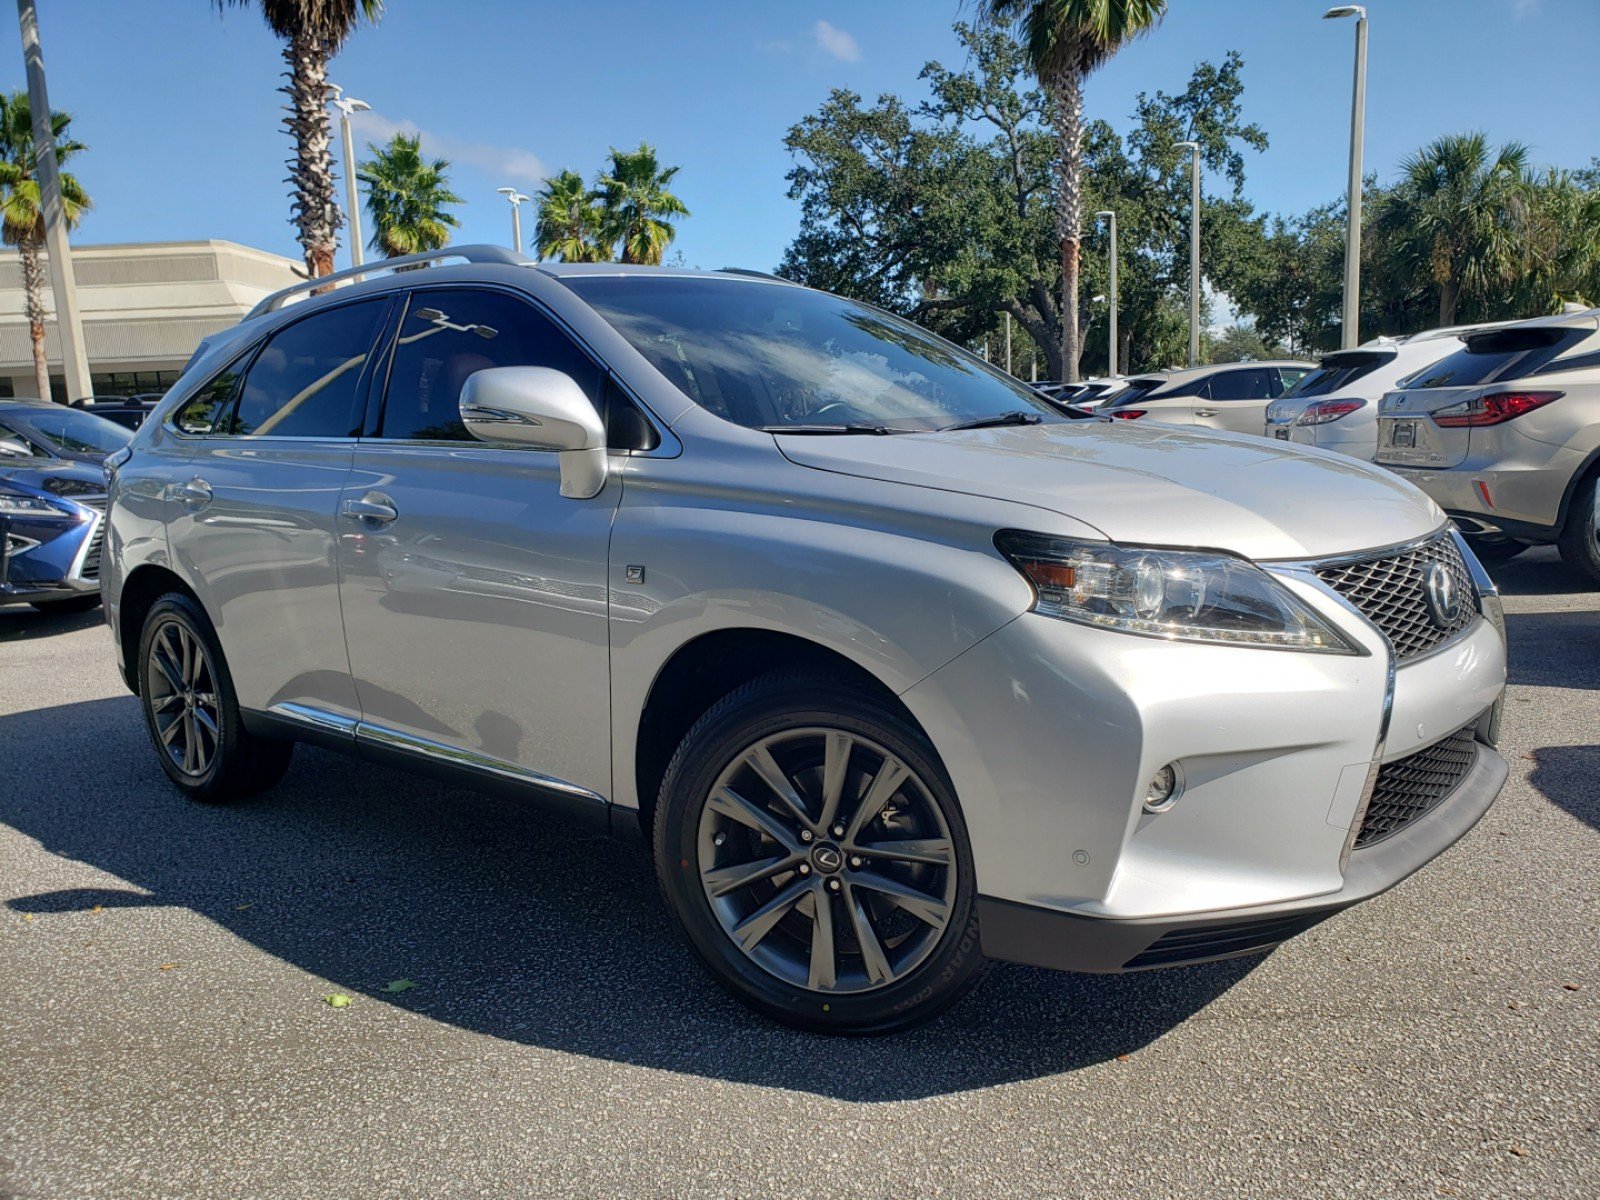 Auto Transport of 2015 Lexus Rx 350 from El Paso, Texas to